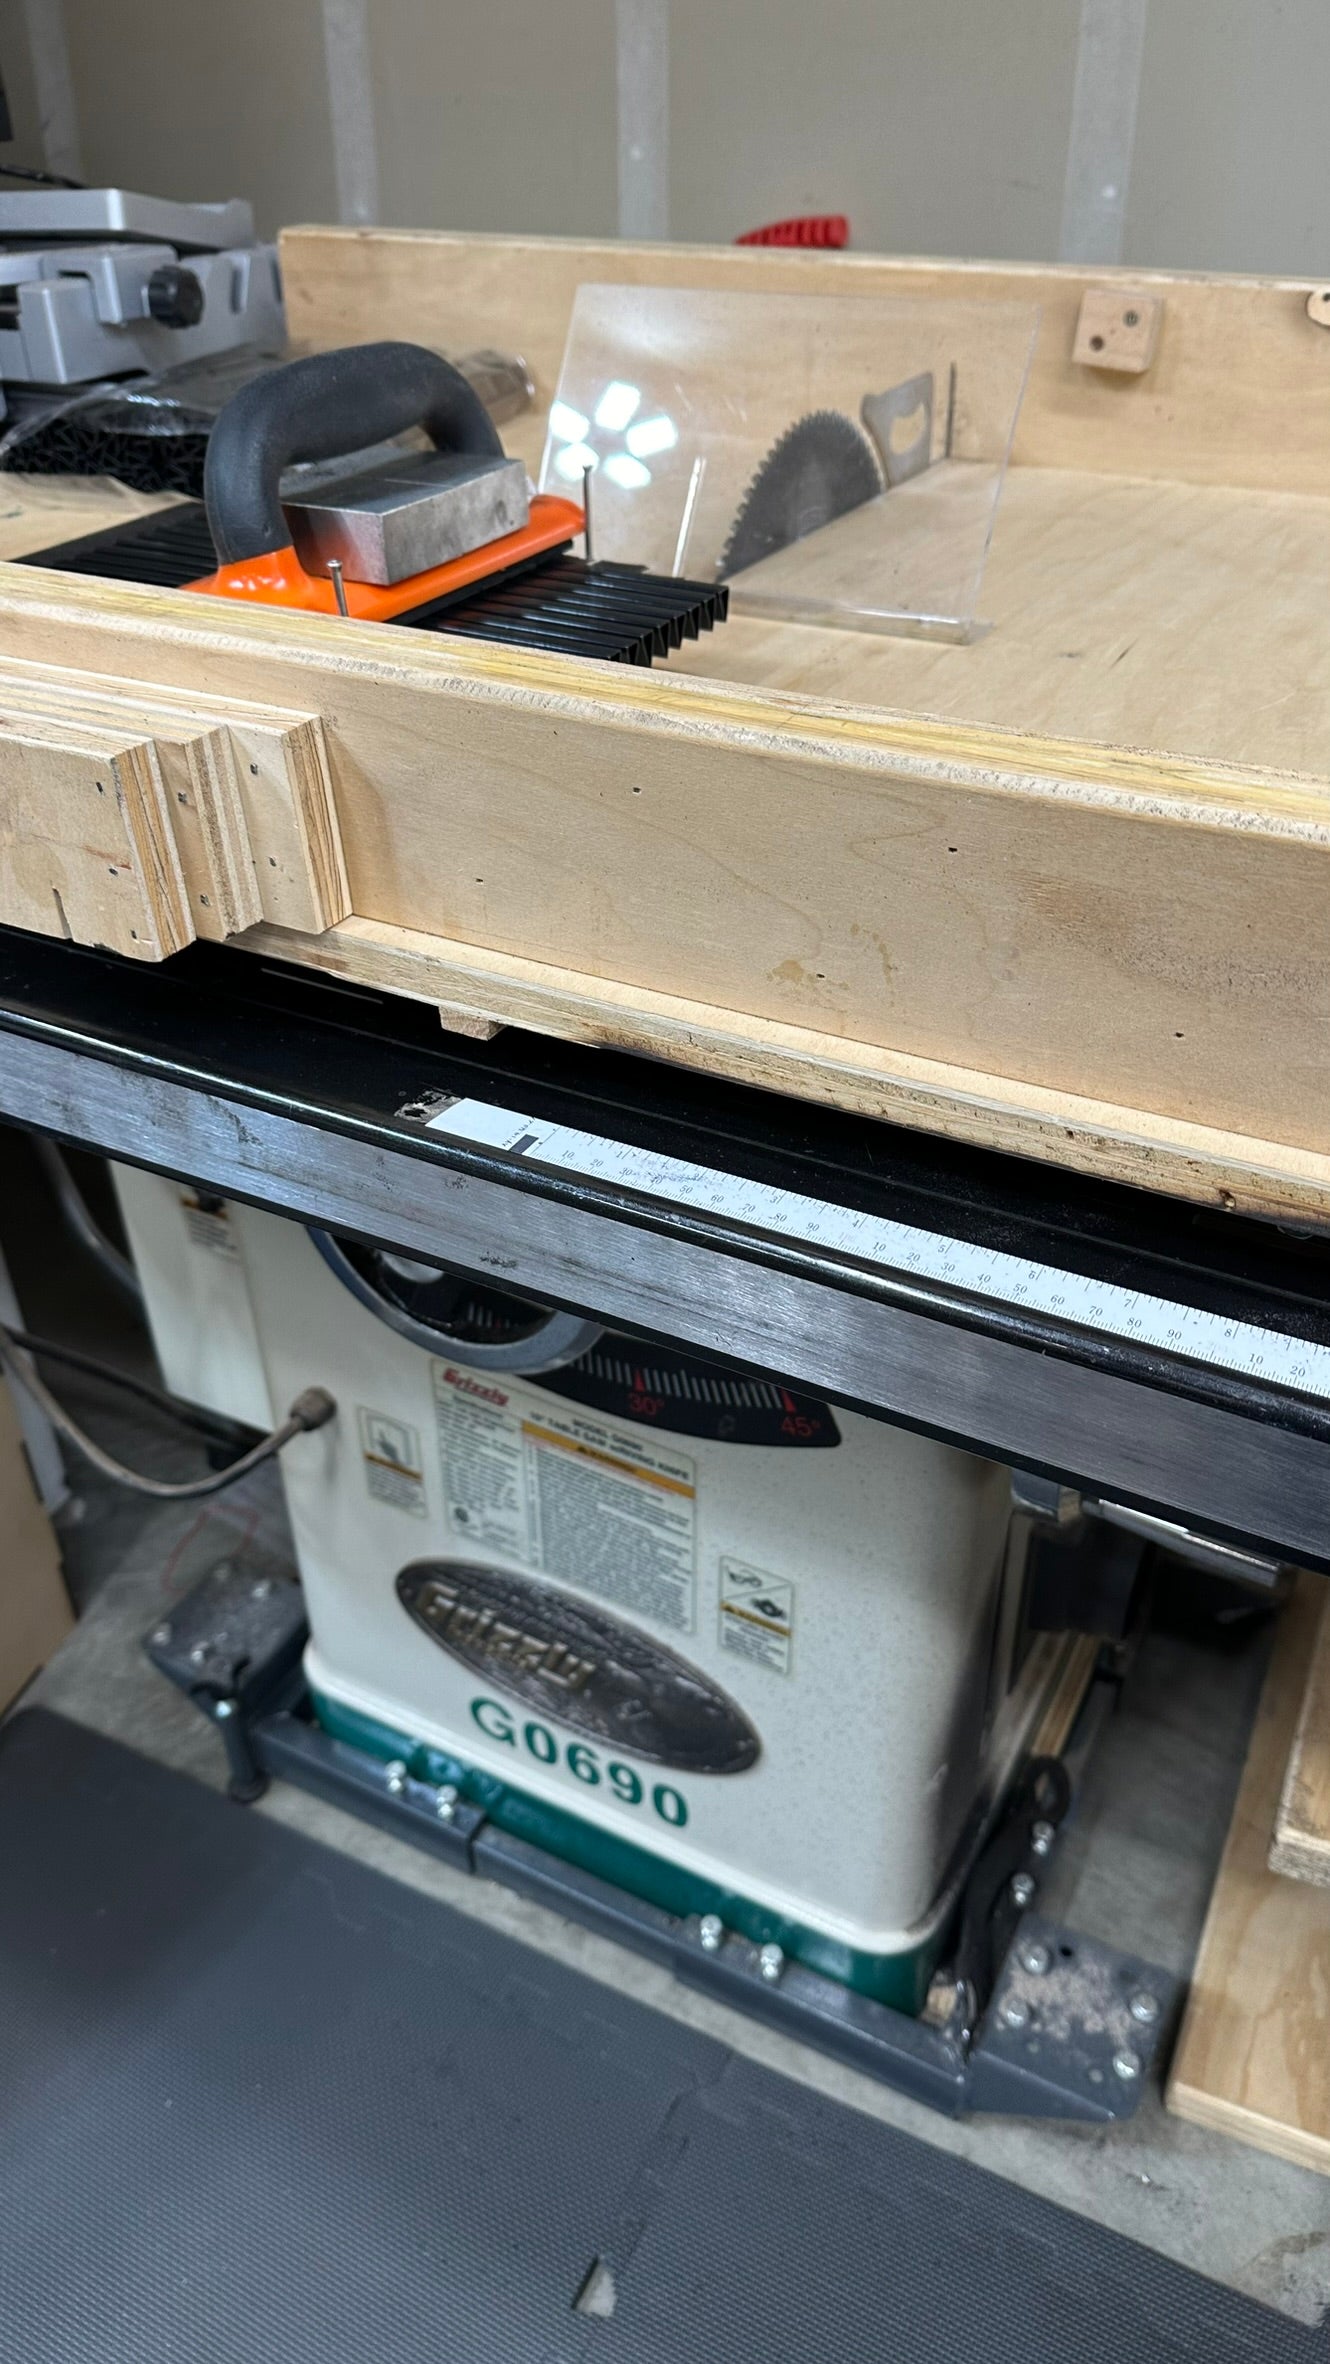 Table saw in the Kurblink shop